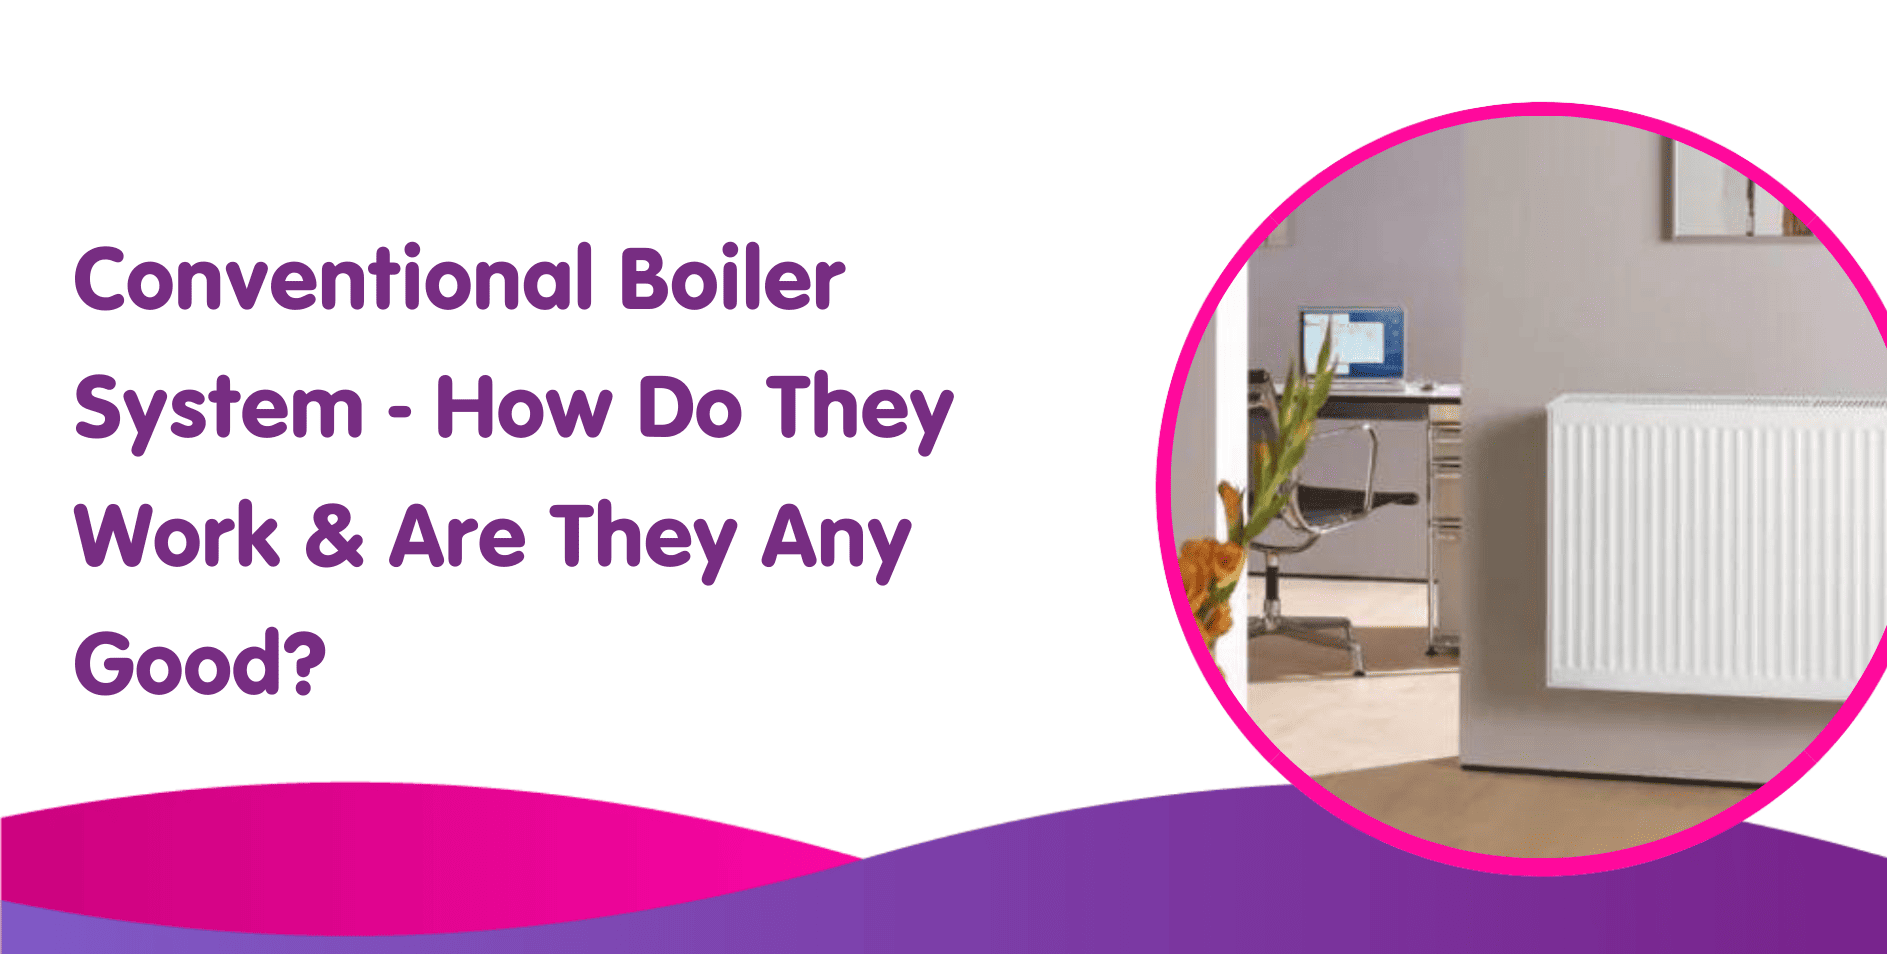 Conventional Boiler System - How Do They Work & Are They Any Good?